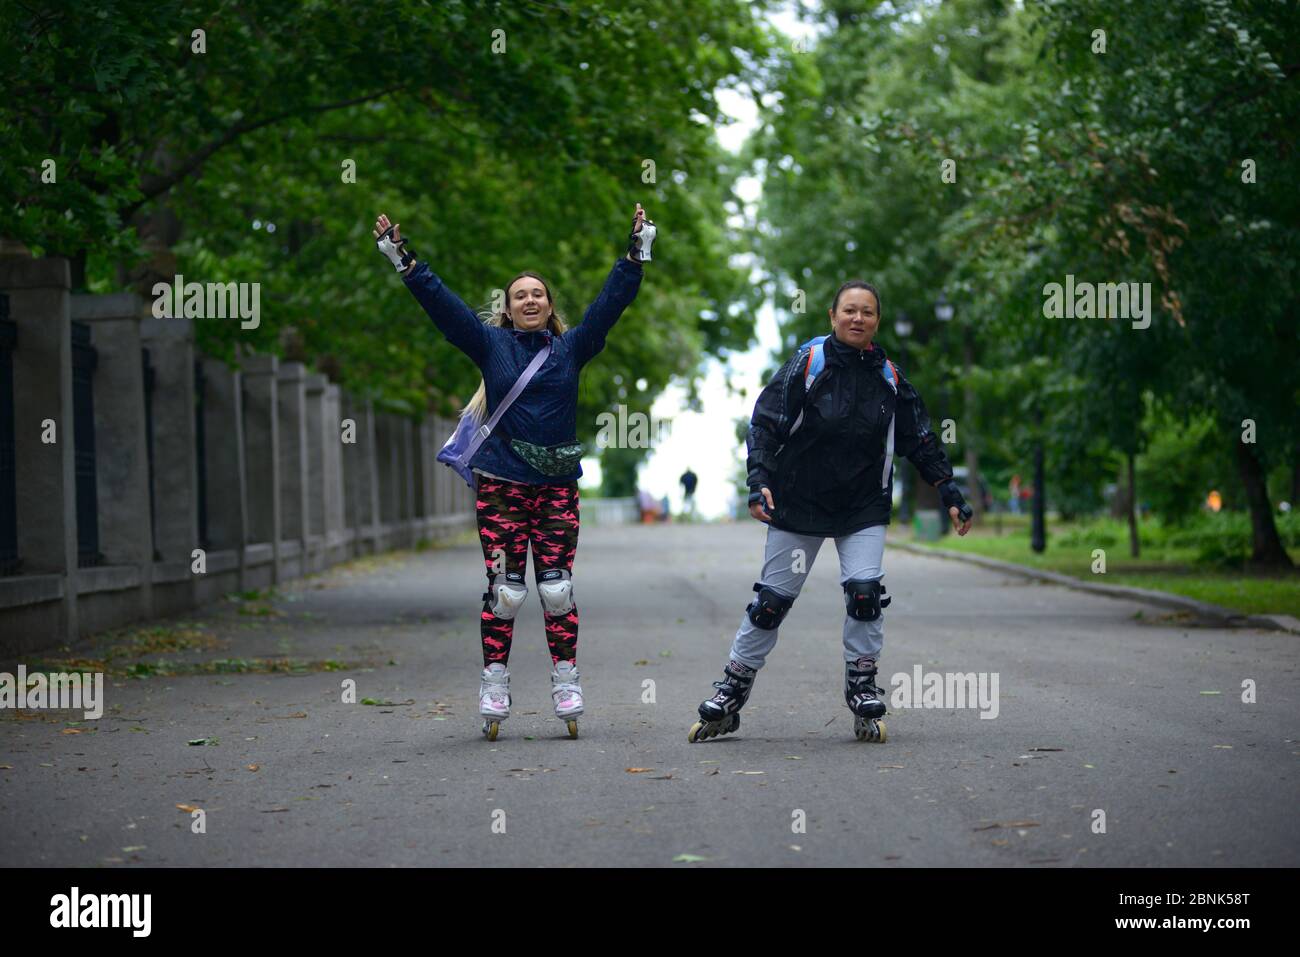 Smiling girls rollerblading in a park Stock Photo